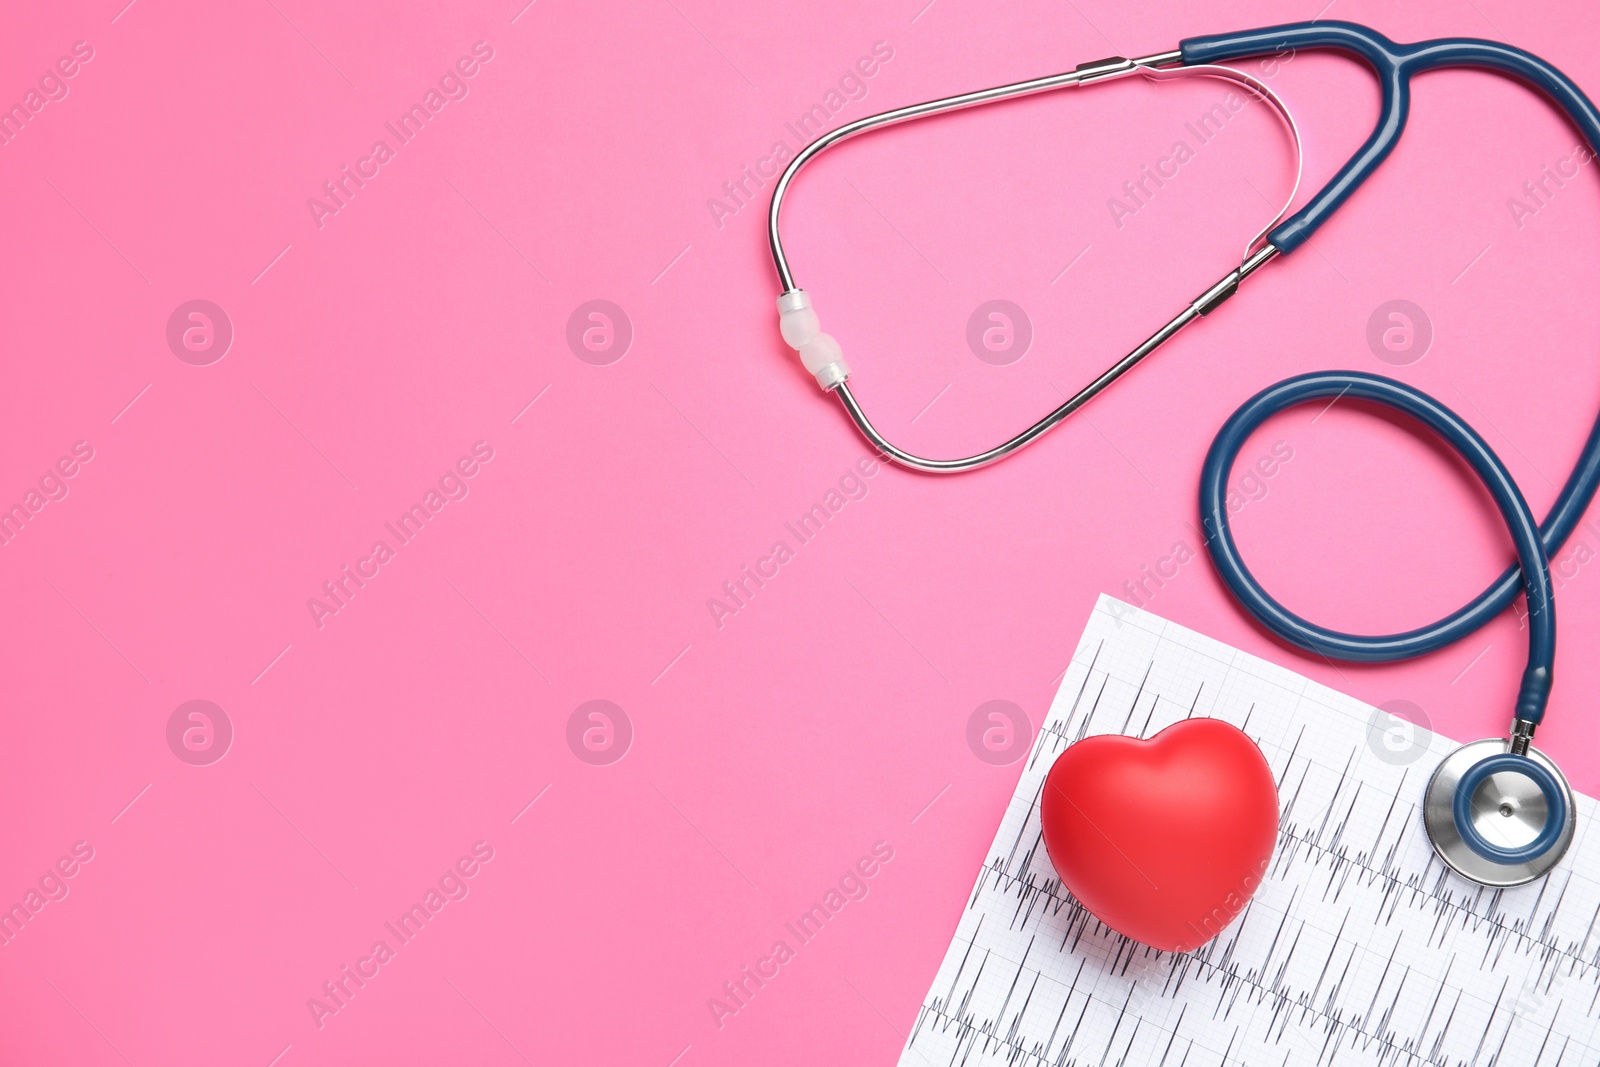 Photo of Stethoscope, cardiogram, red decorative heart and space for text on pink background, flat lay. Cardiology concept